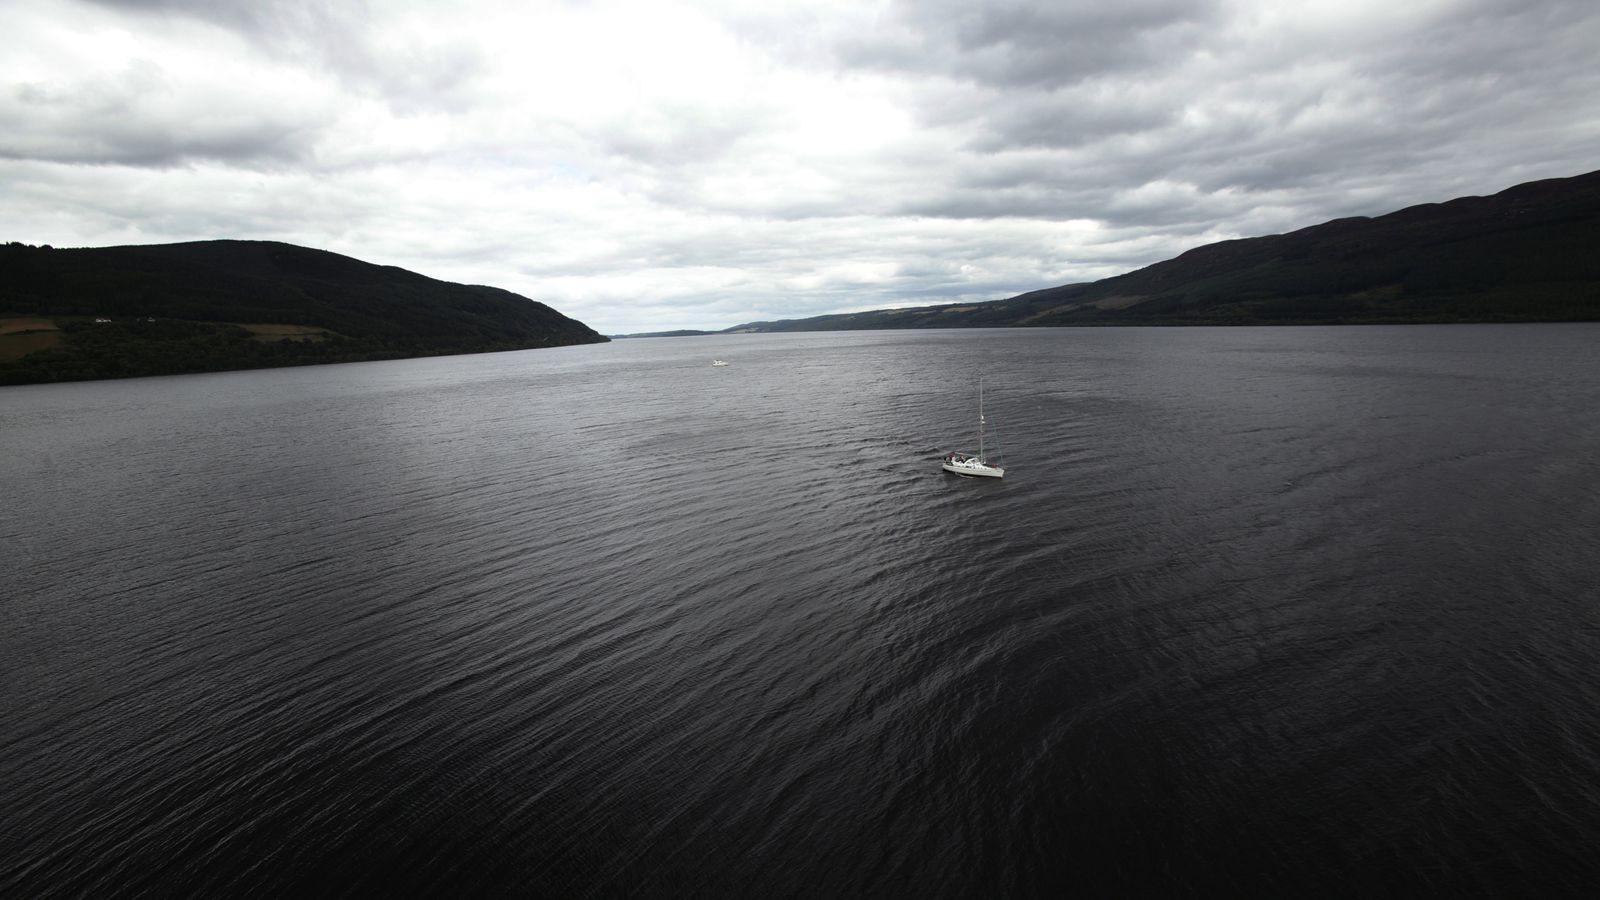 Busy hunting for the Loch Ness monster - photo 1.